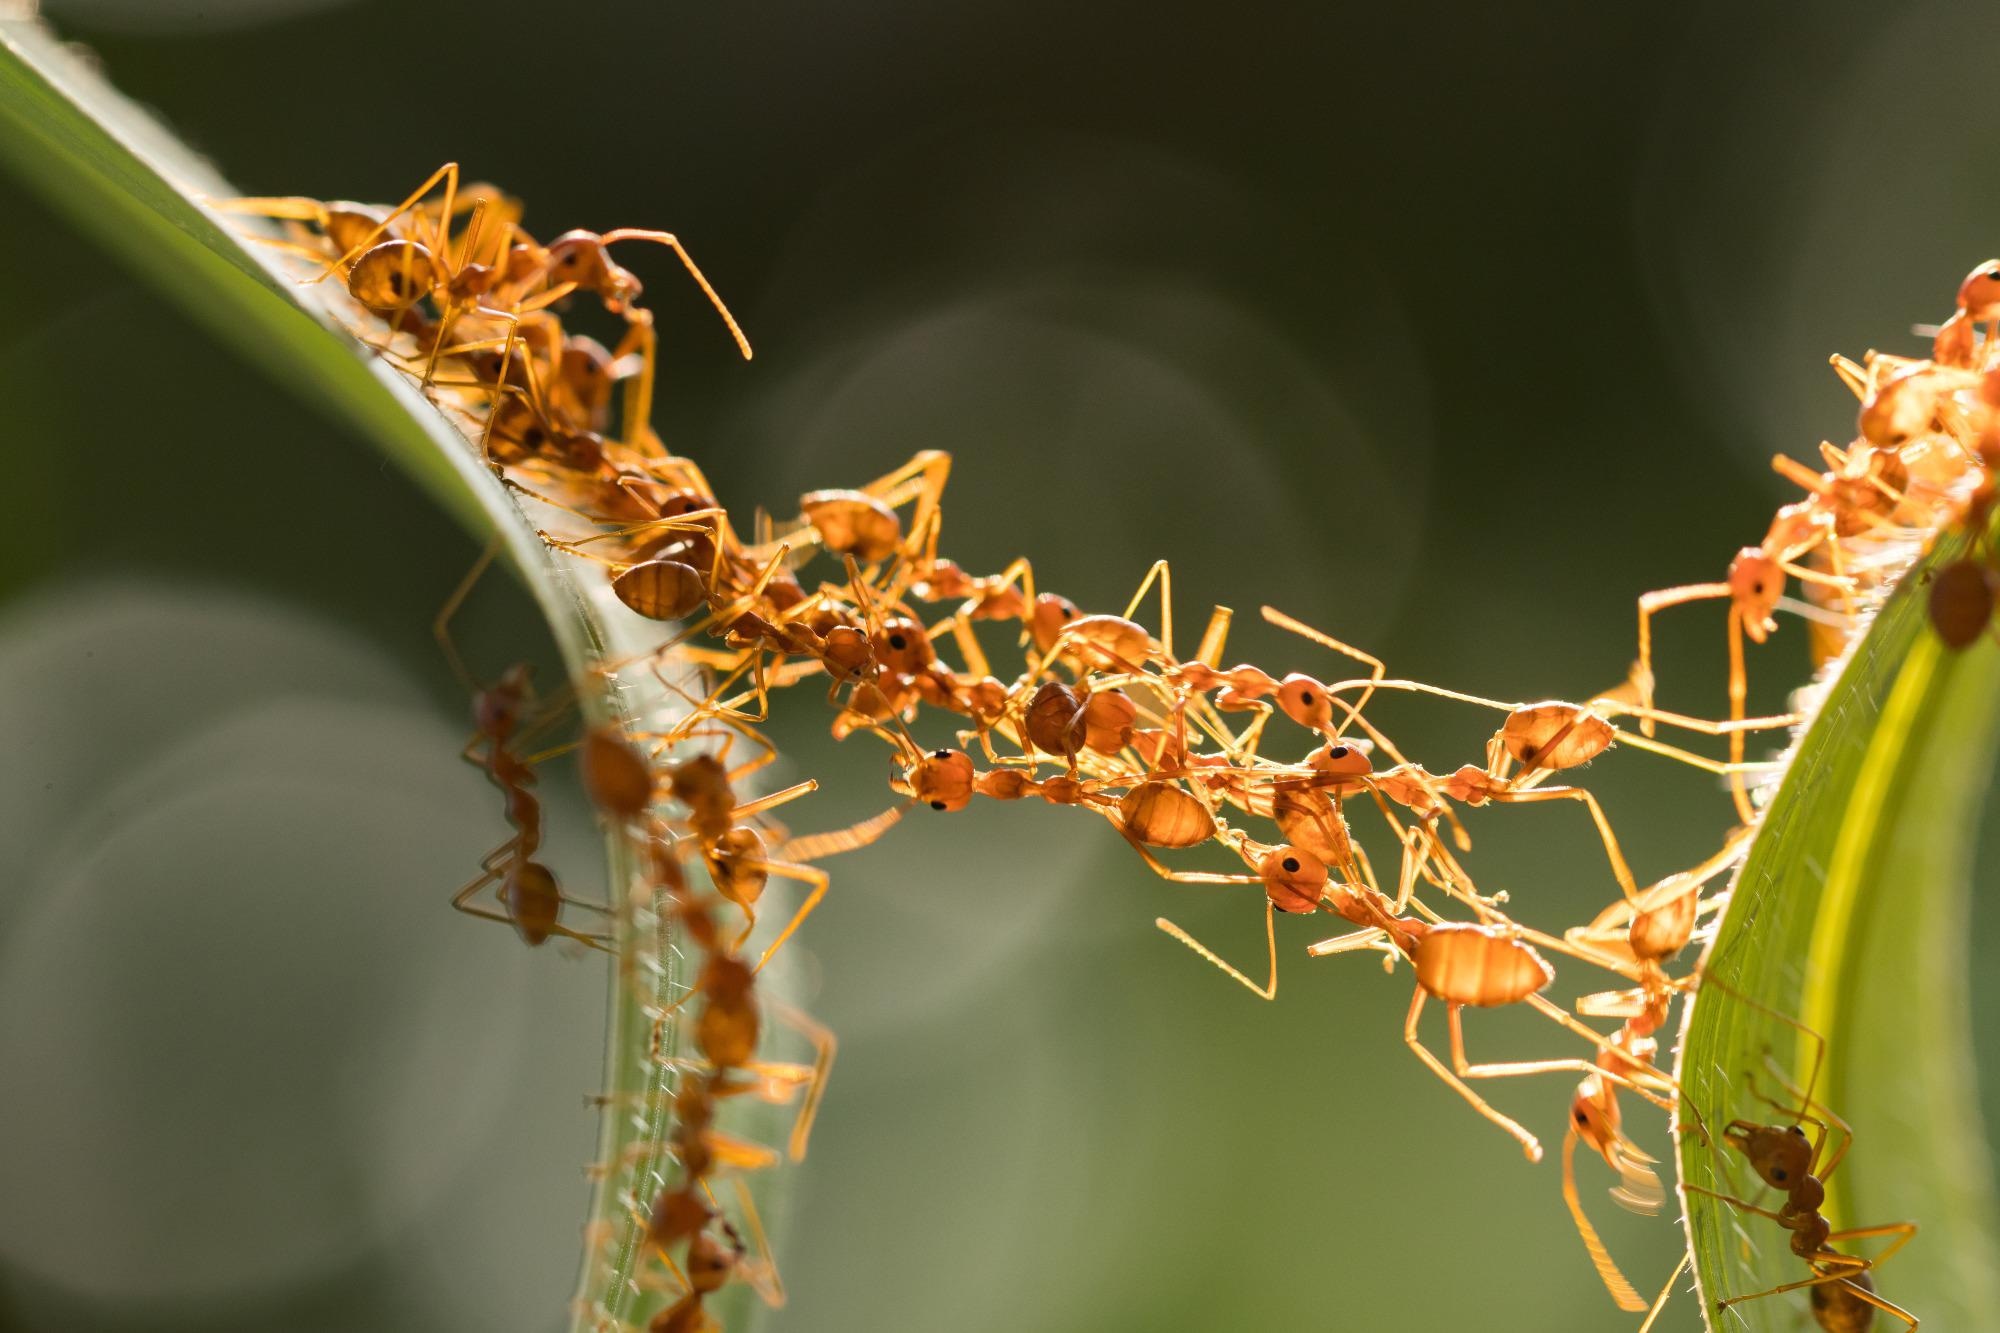 How the Eusocial Nature of Ants Influences their Response to Climate Change.